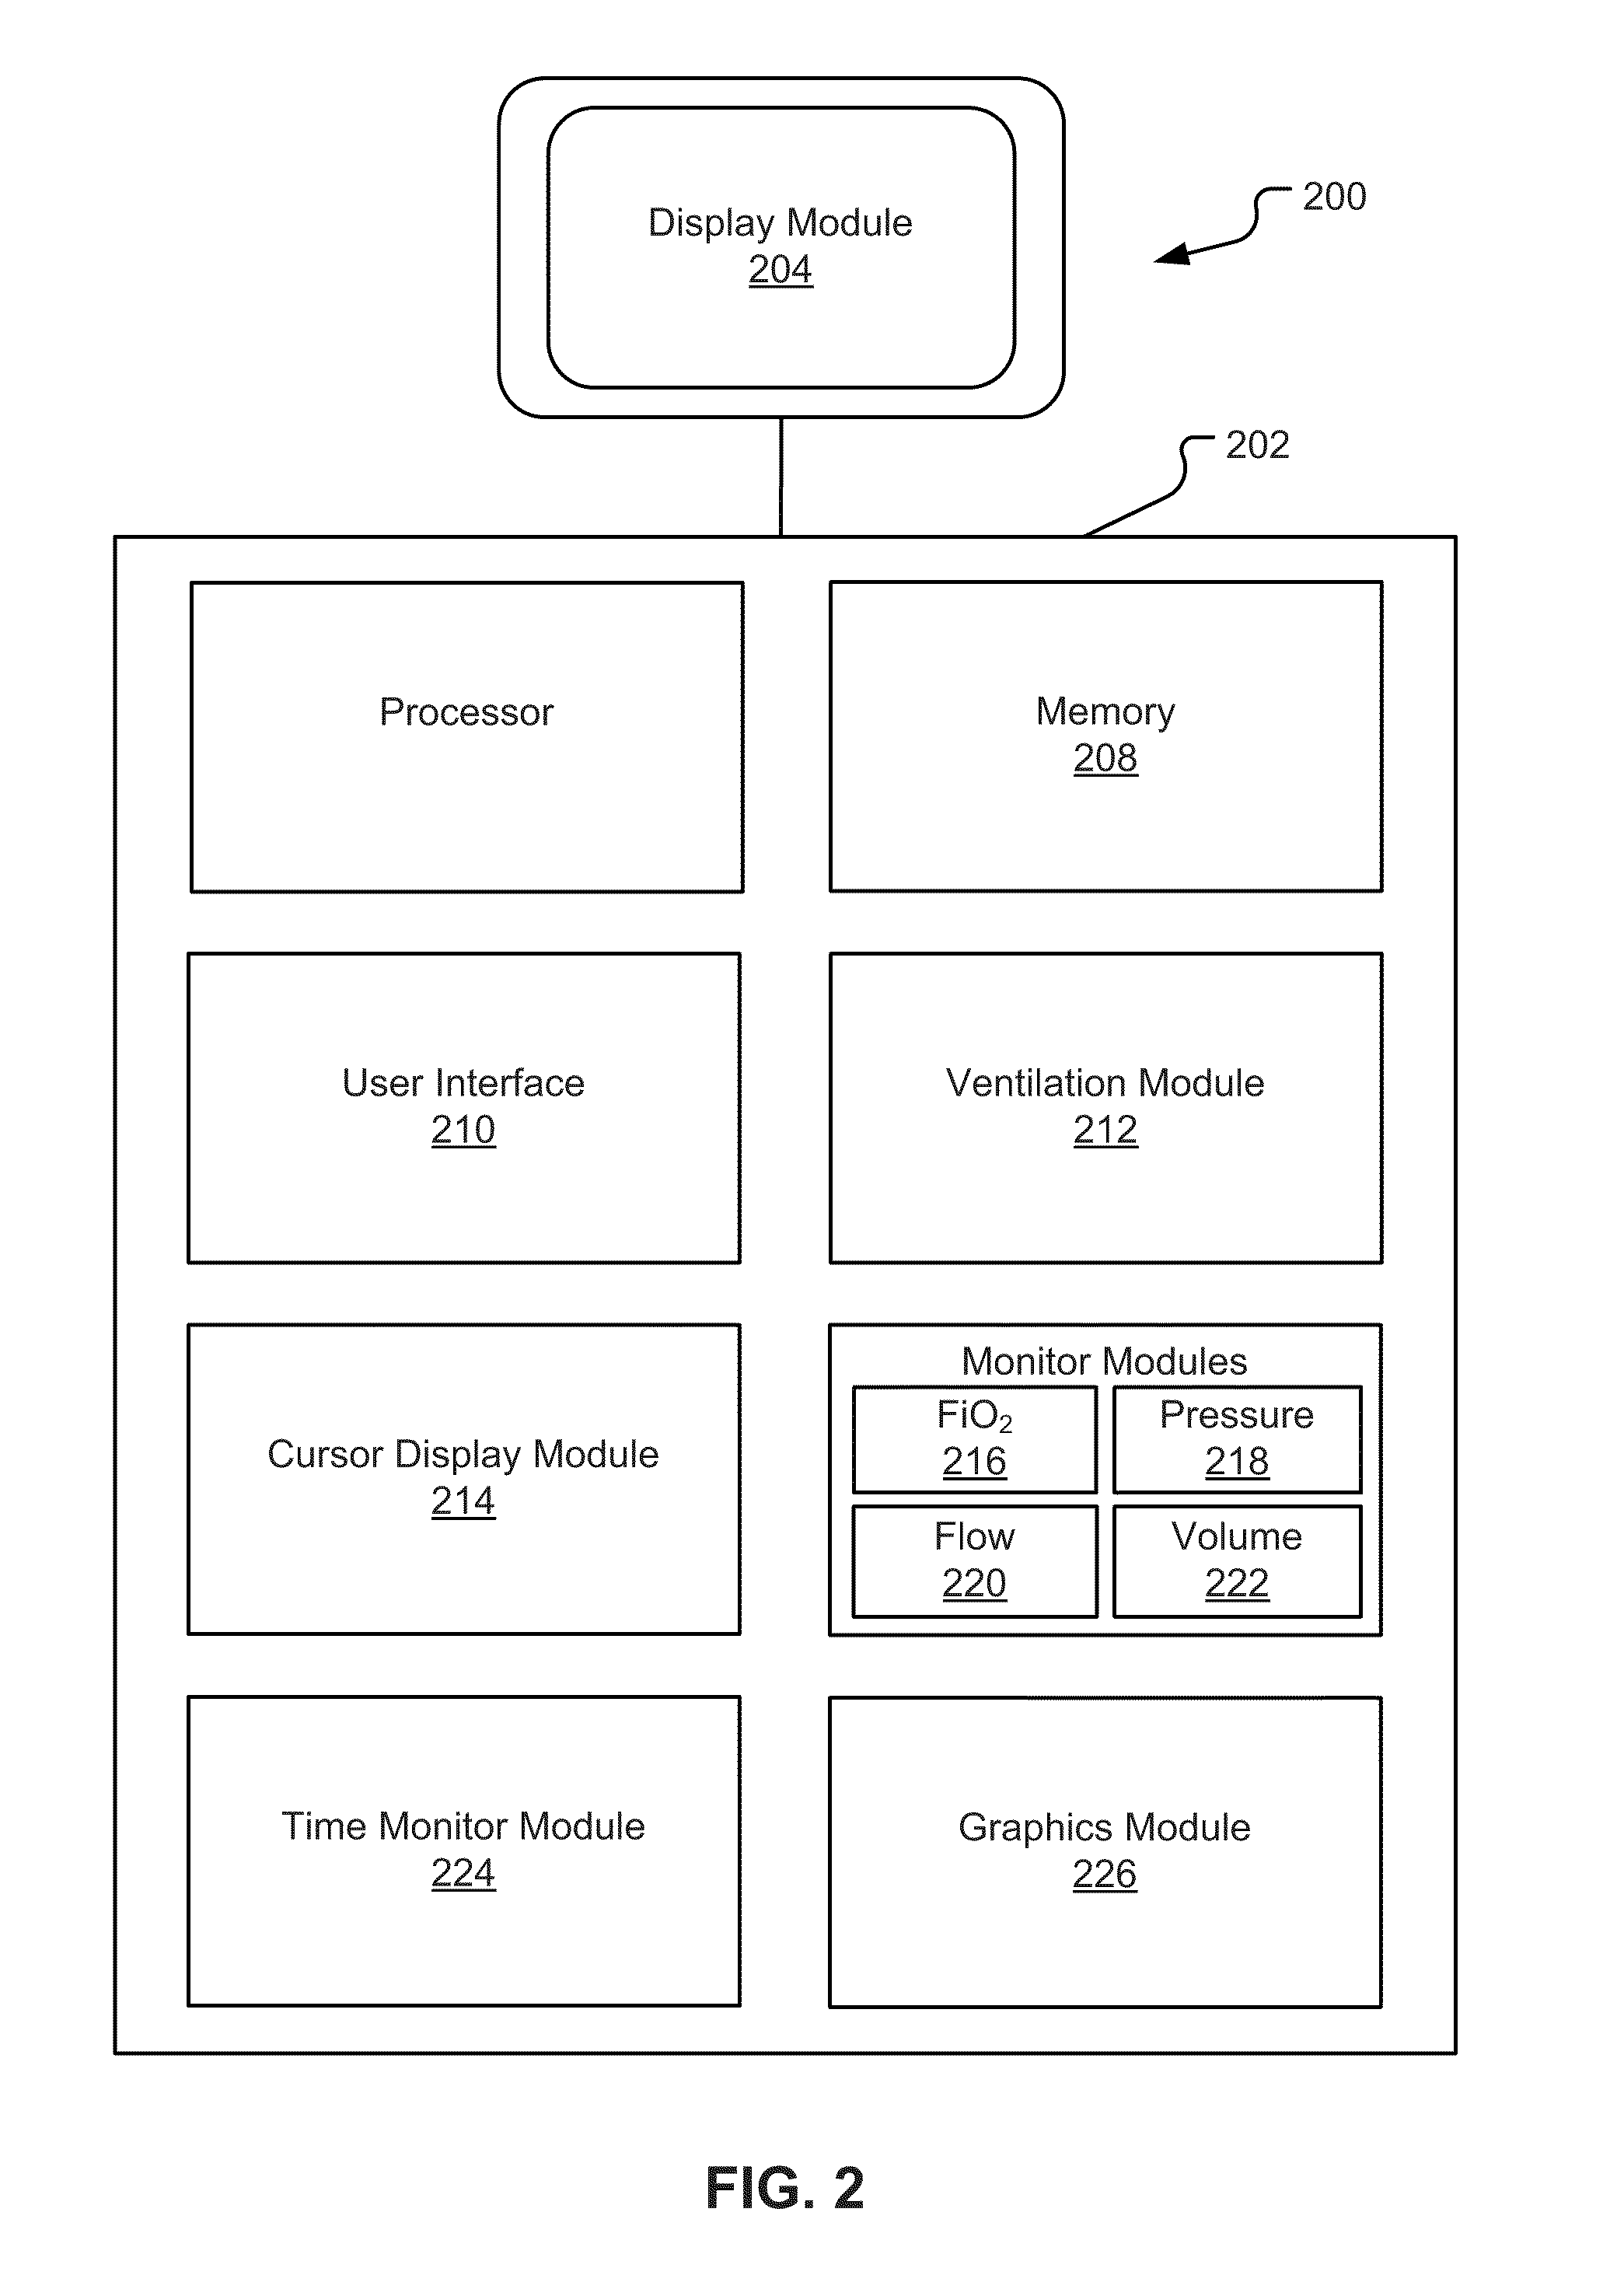 Display Of Respiratory Data On A Ventilator Graphical User Interface